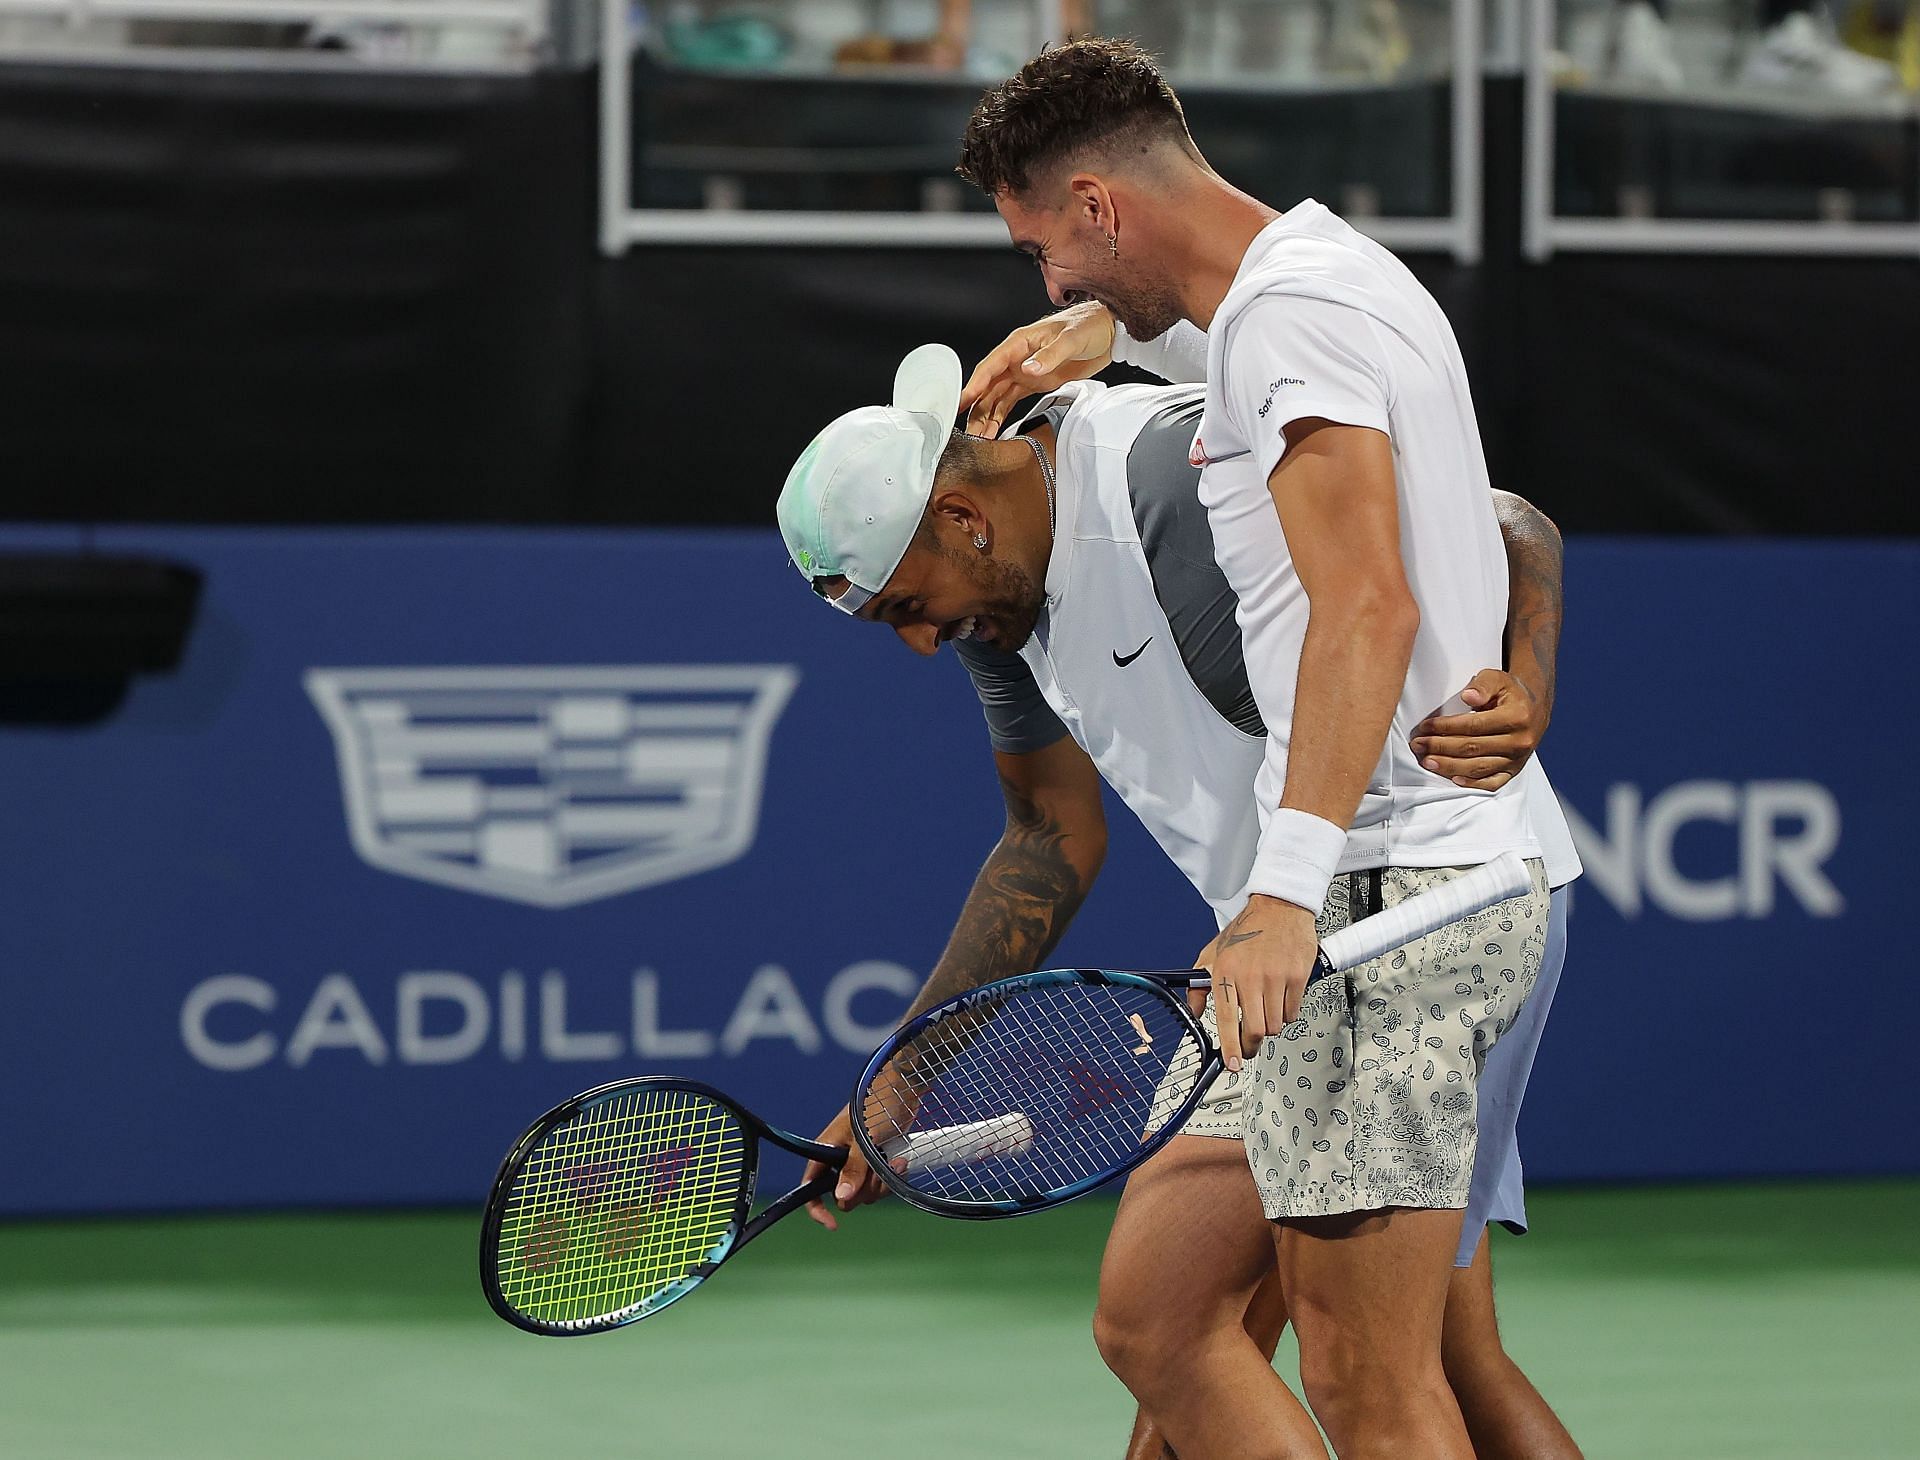 Nick Kyrgios has been pitted against his compatriot, best mate and doubles partner Thanasi Kokkinakis